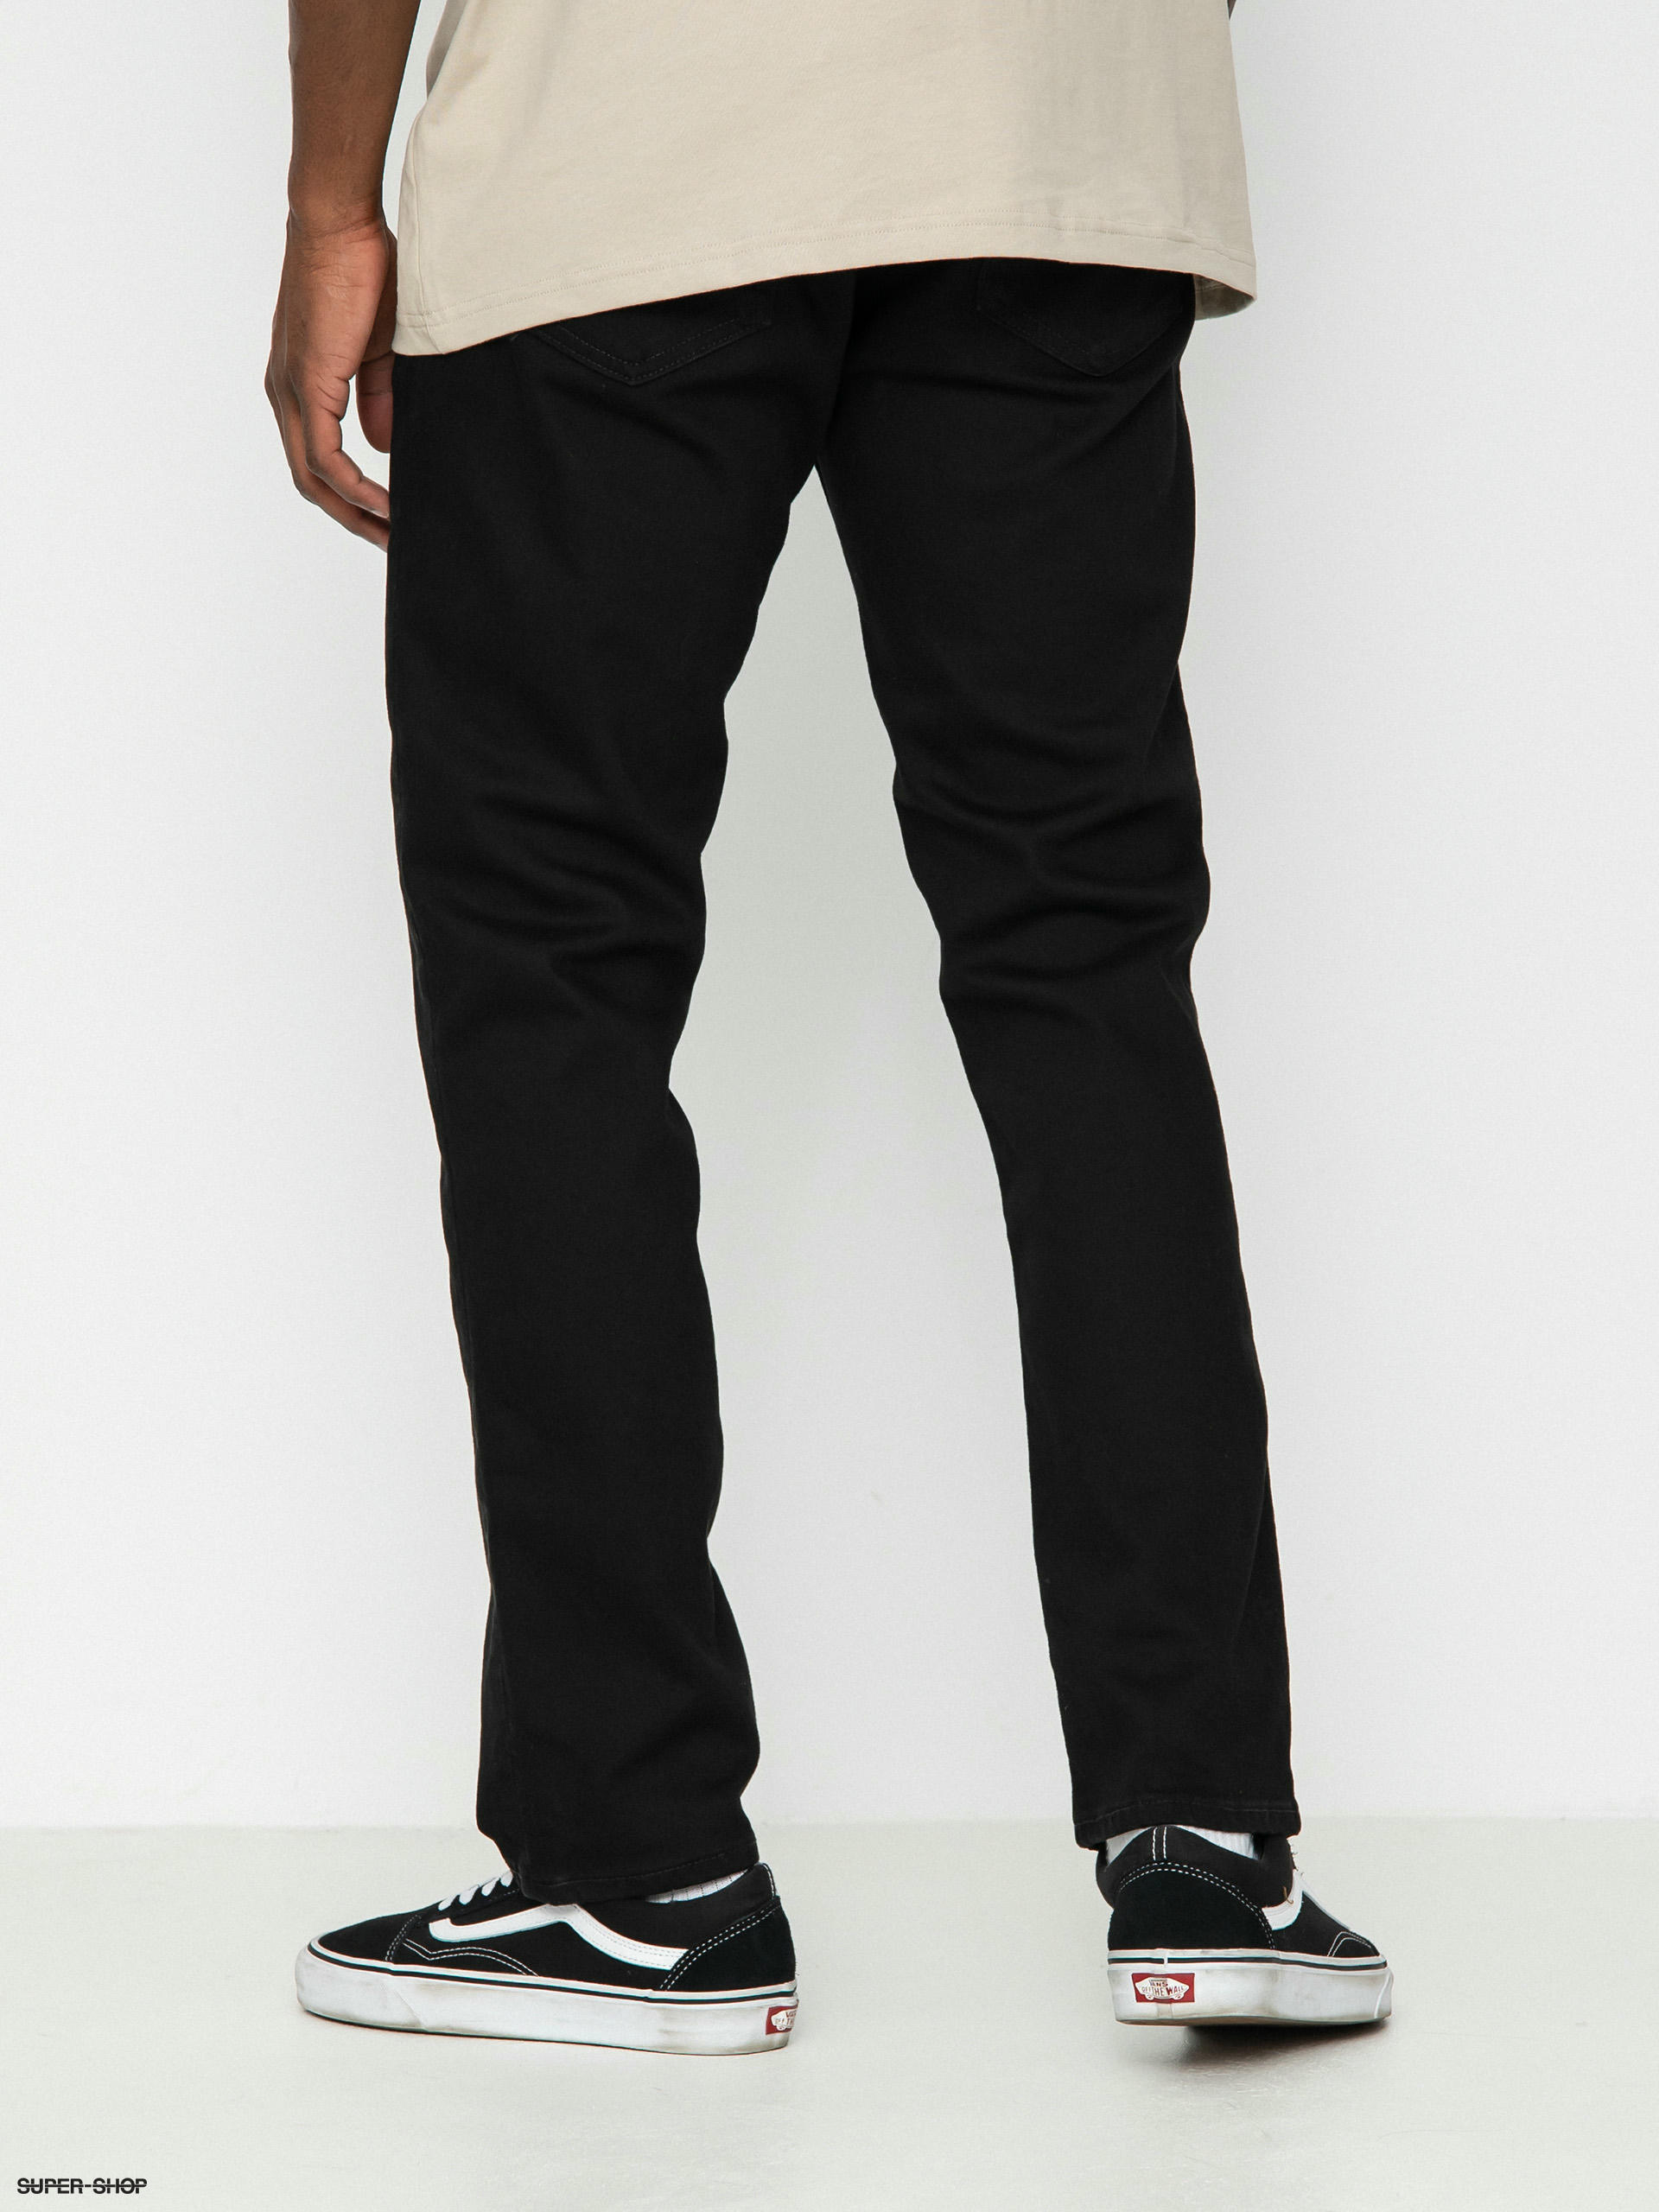 Buy Levis Chinos online  Men  88 products  FASHIOLAin